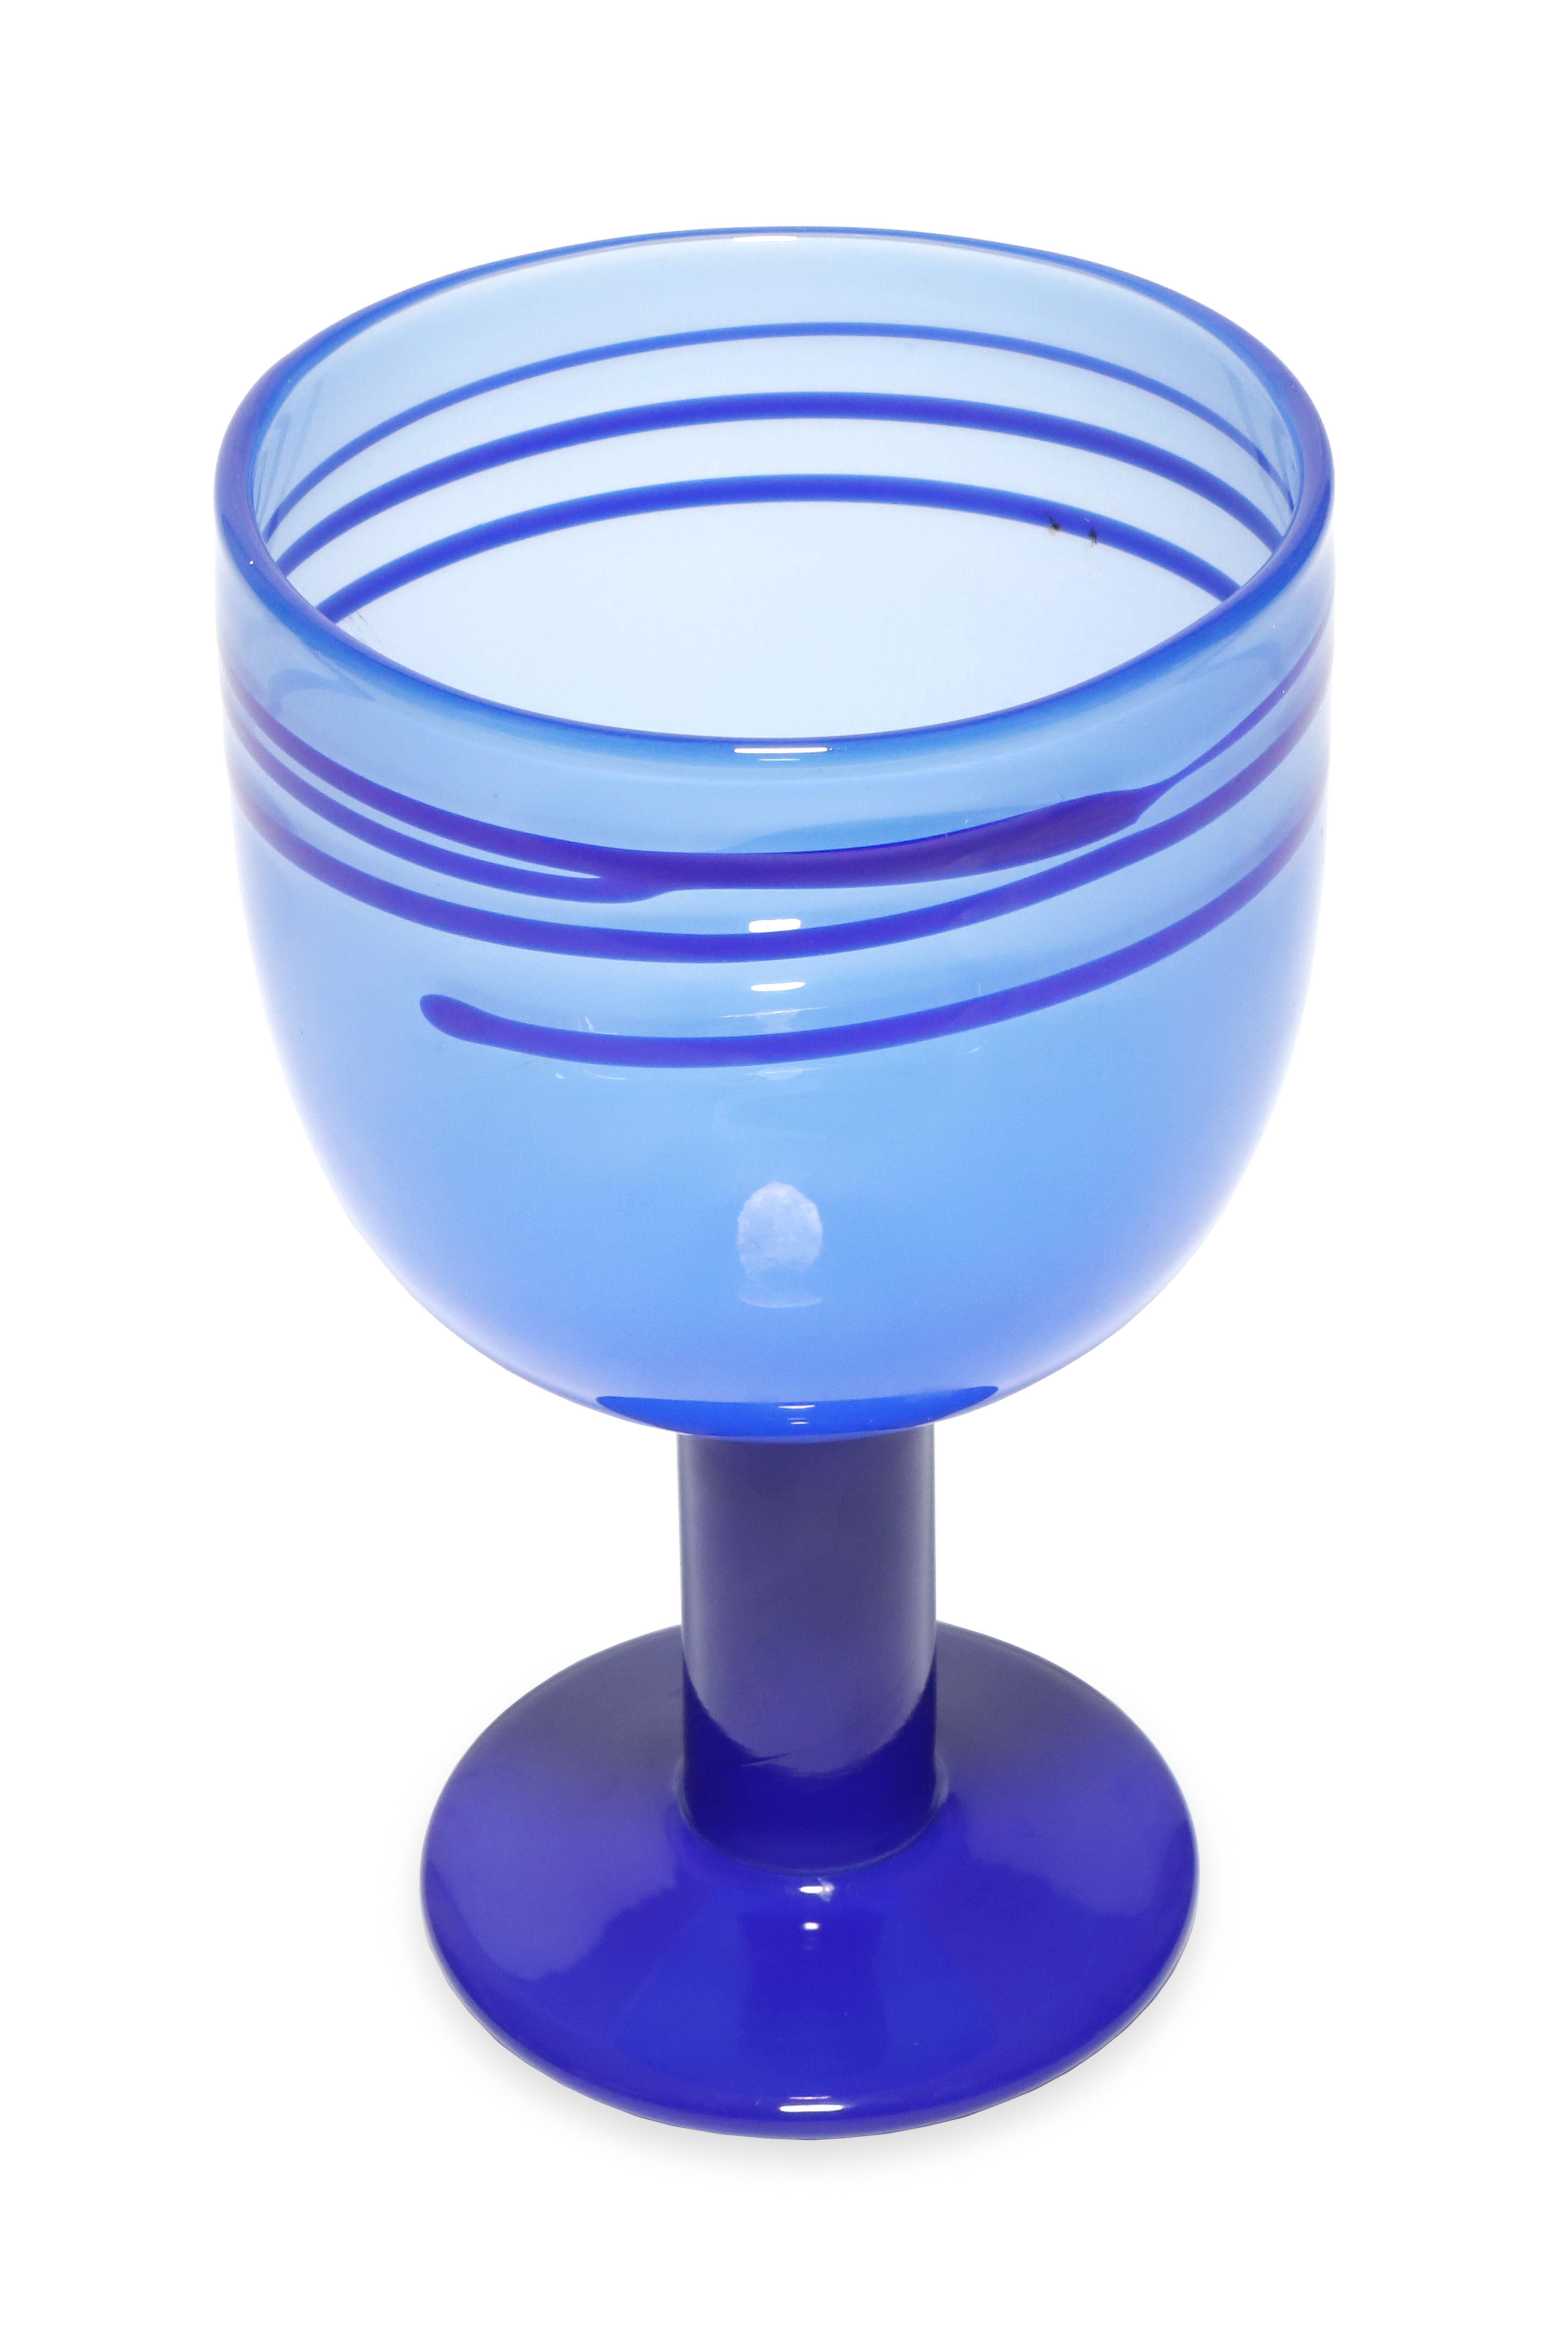 Blue glass 'Pop' goblets by Swedish designer Gunnar Cyren, produced by Orrefors, c. 1968. This goblet has a darker blue handle and vase and a beutiful detail around the top rim. Engraved signature on bottom 